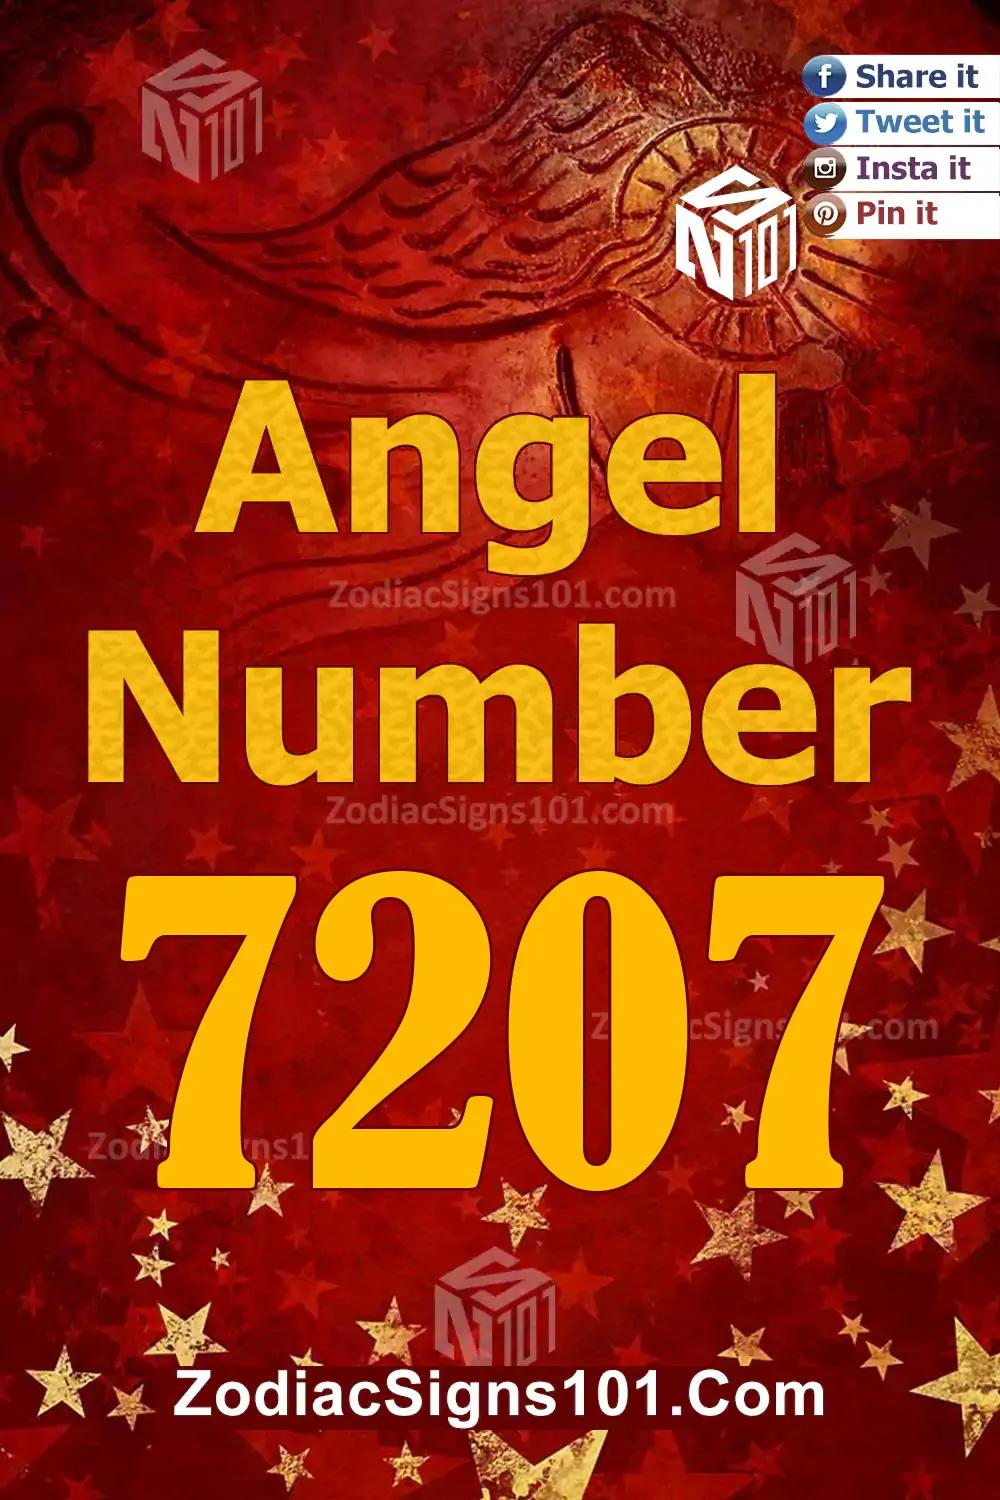 7207 Angel Number Meaning